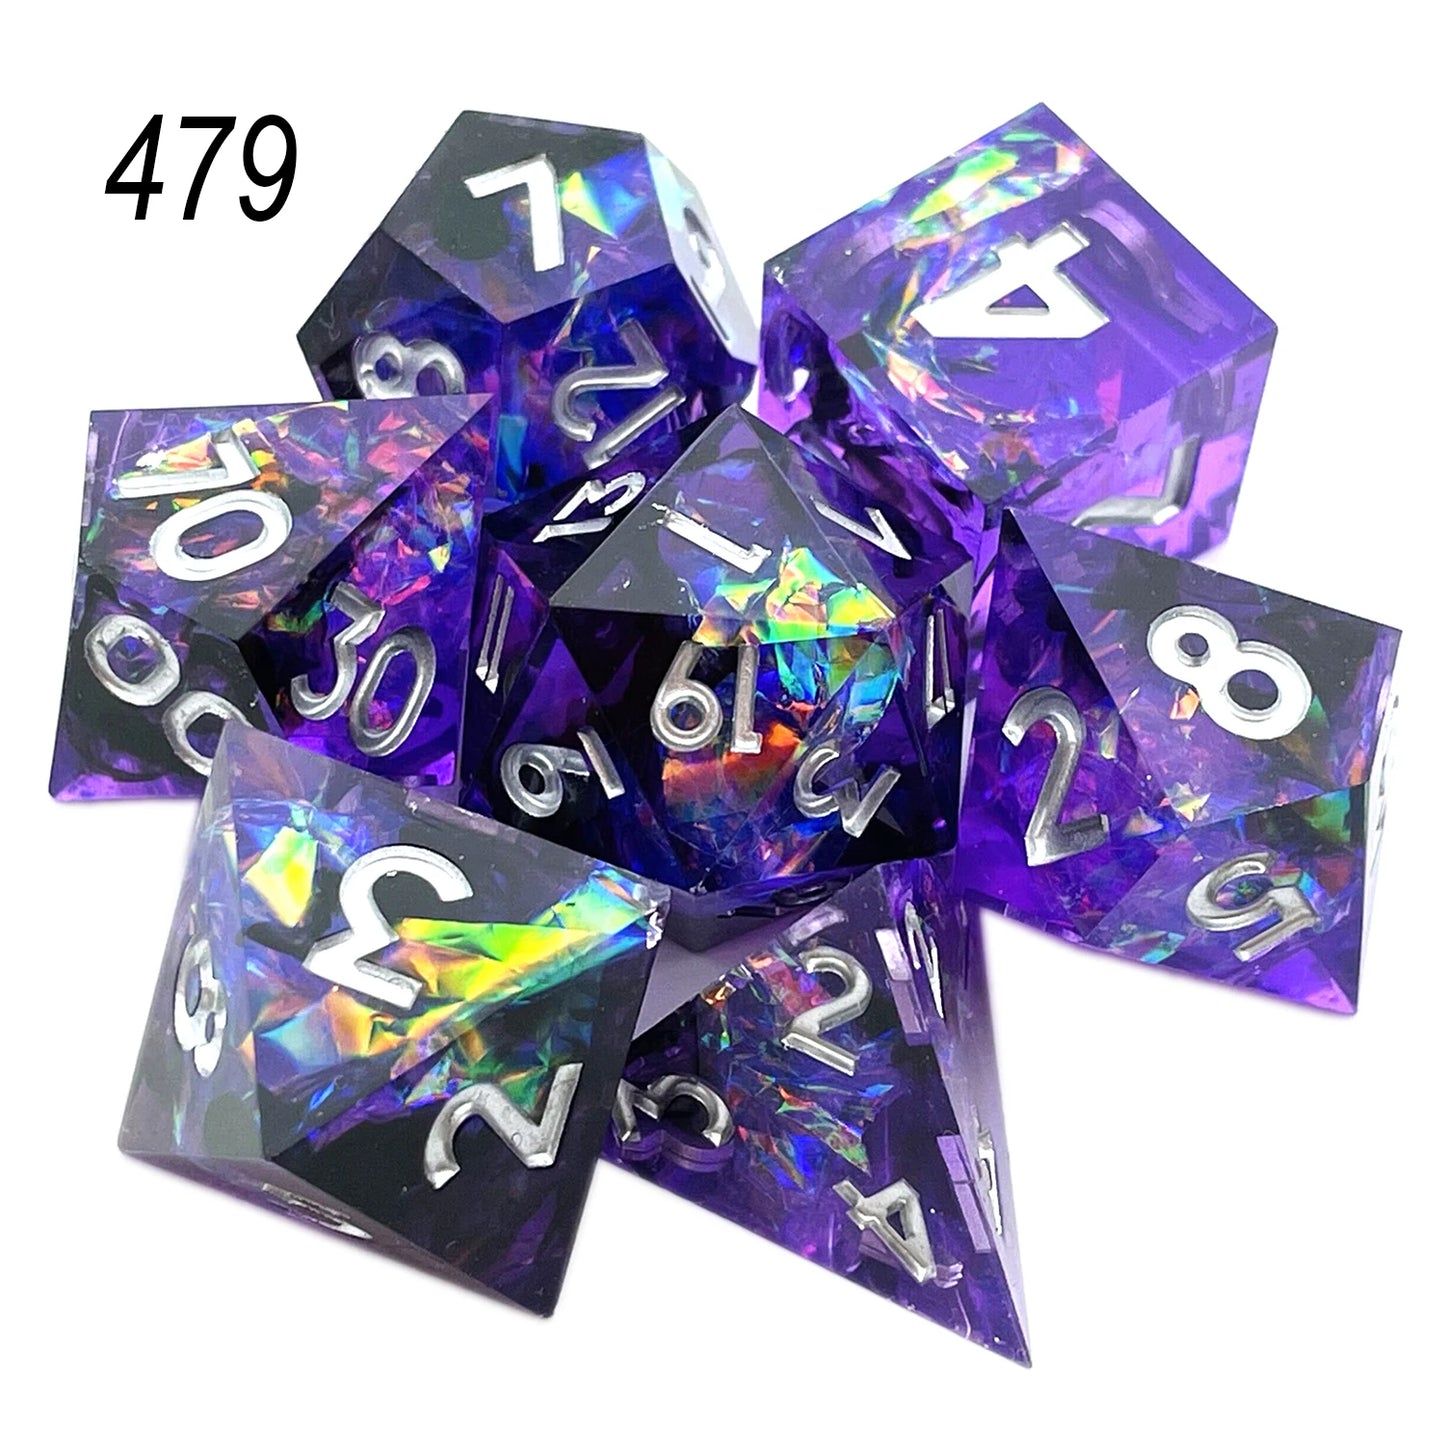 2023 Resin Dice 7PCs Dnd Set Solid Polyhedral D&D Dice DND For Role Playing Rpg Rol Pathfinder Board Game Dragon Scale Gifts 479